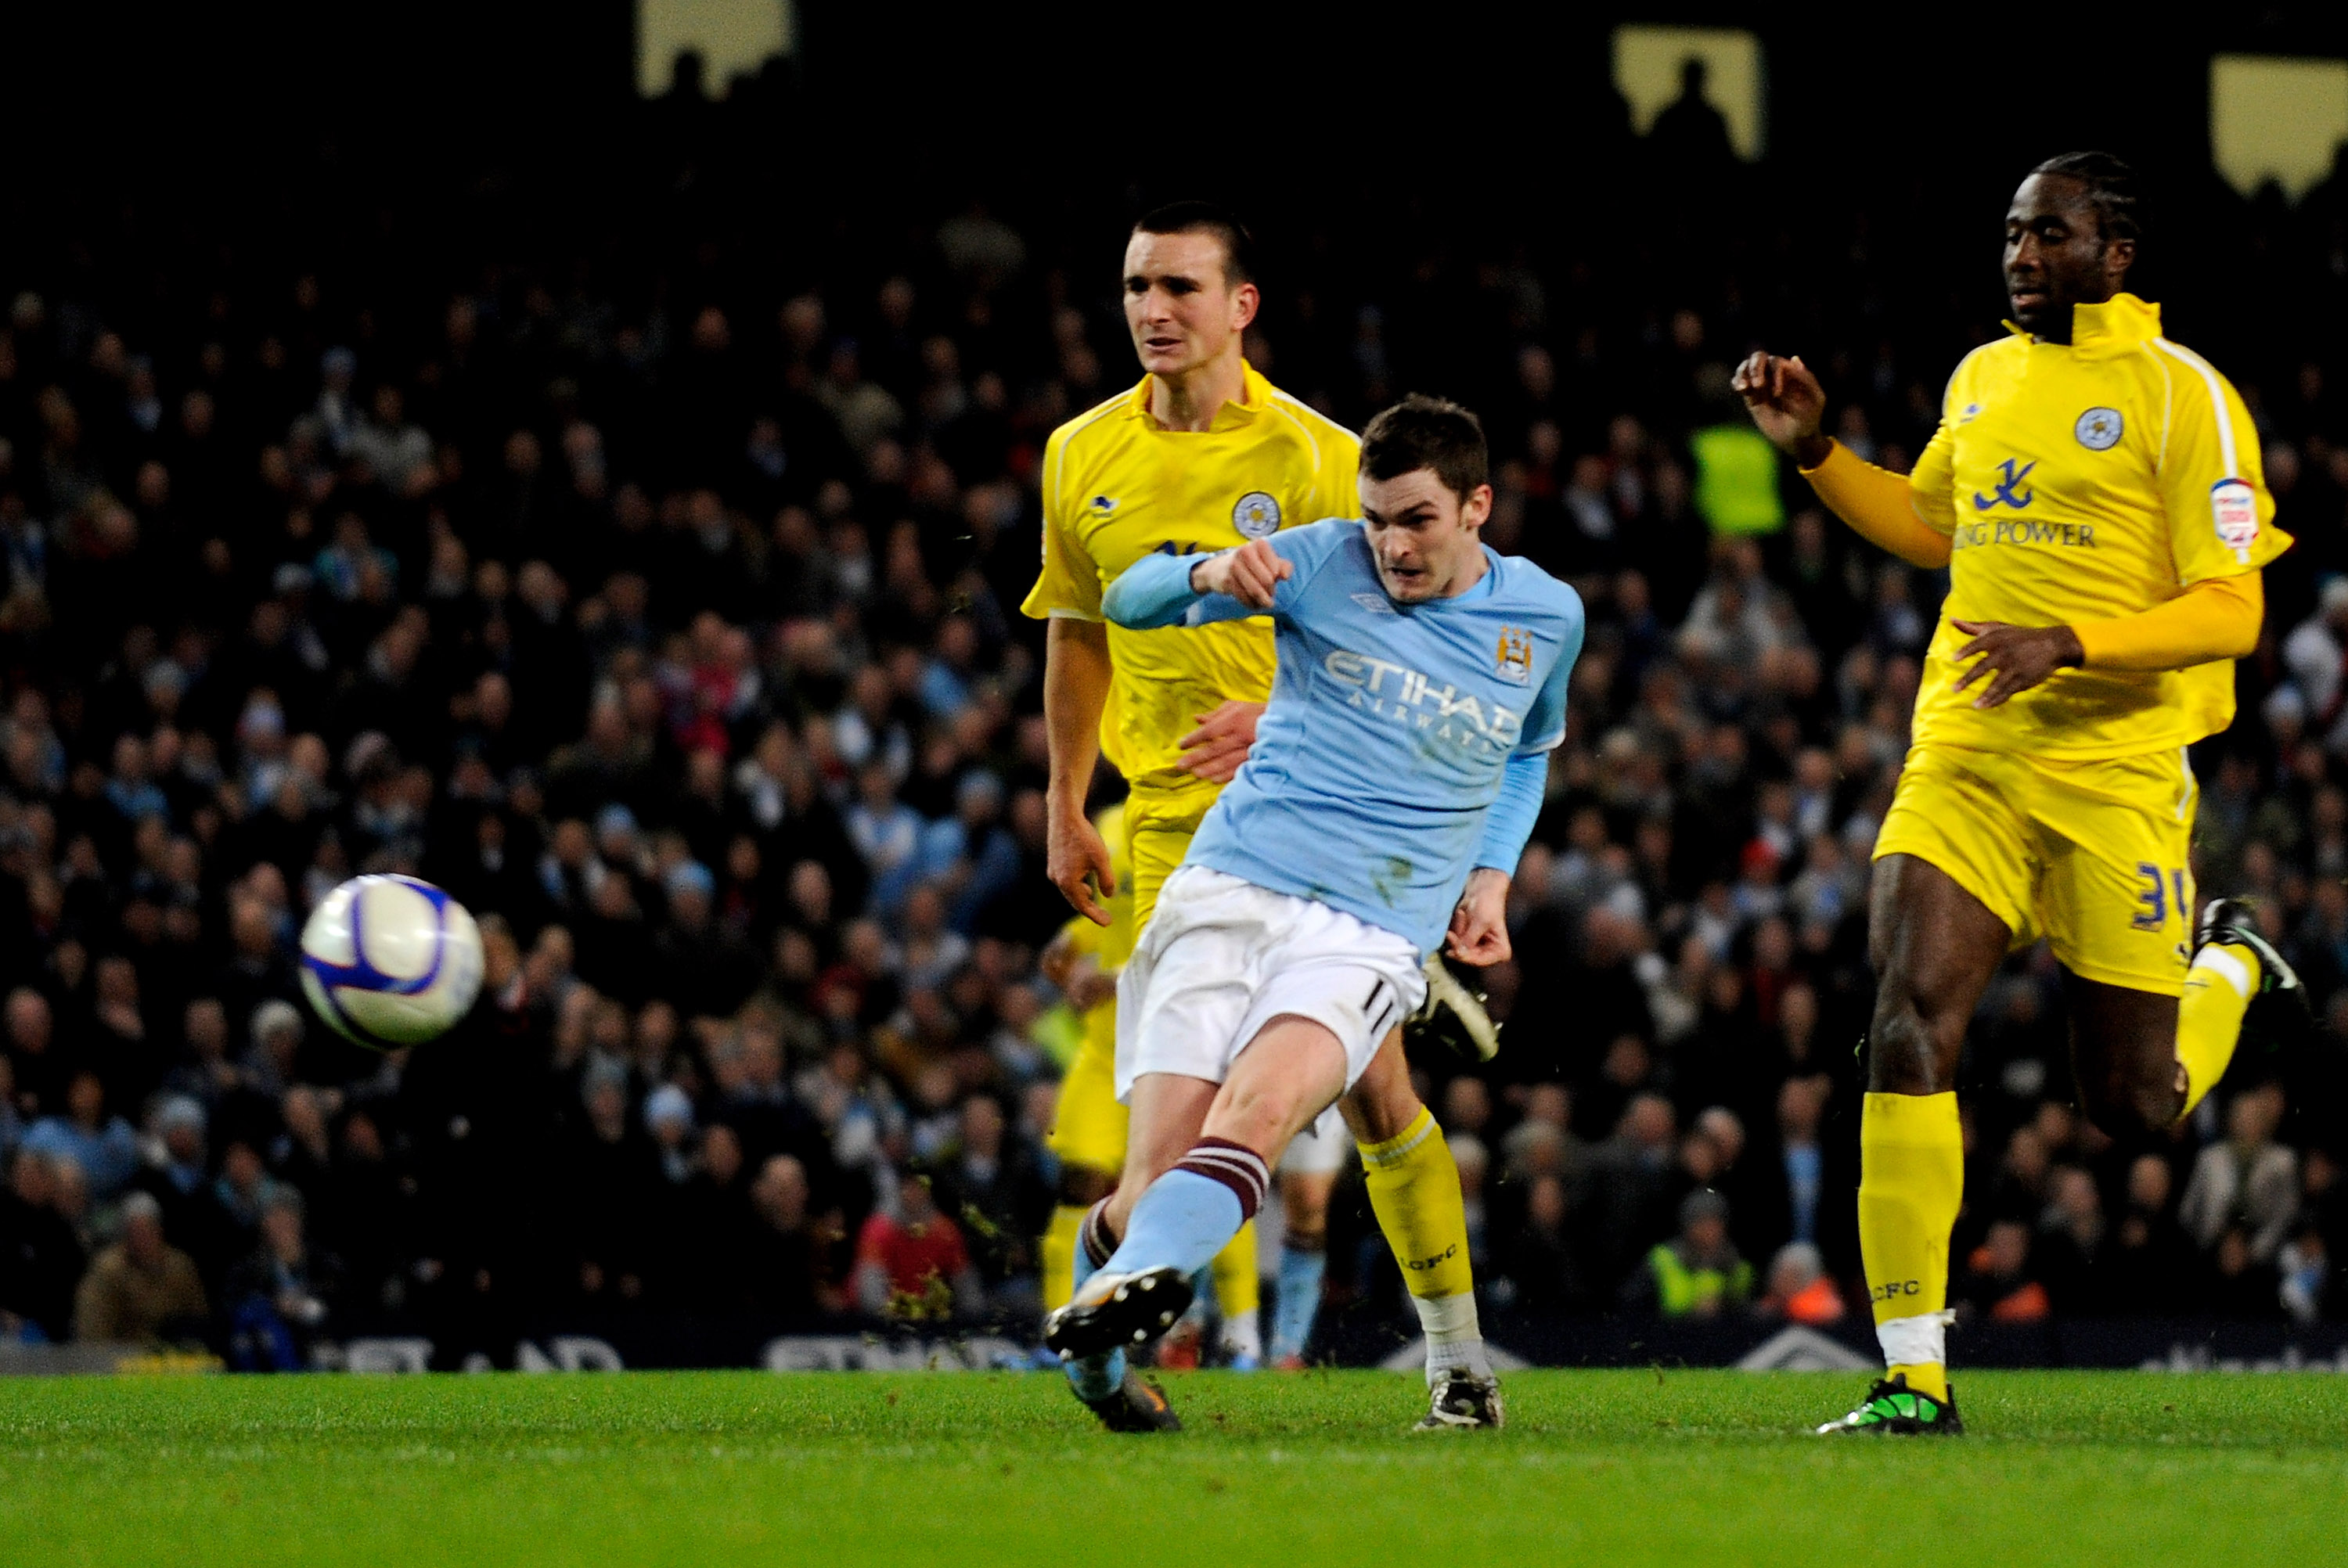 MANCHESTER, ENGLAND - JANUARY 18:  Adam Johnson of Manchester City scores his team's third goal during the FA Cup sponsored by E.On Third Round Replay match between Manchester City and Leicester City at the City of Manchester Stadium on January 18, 2011 i